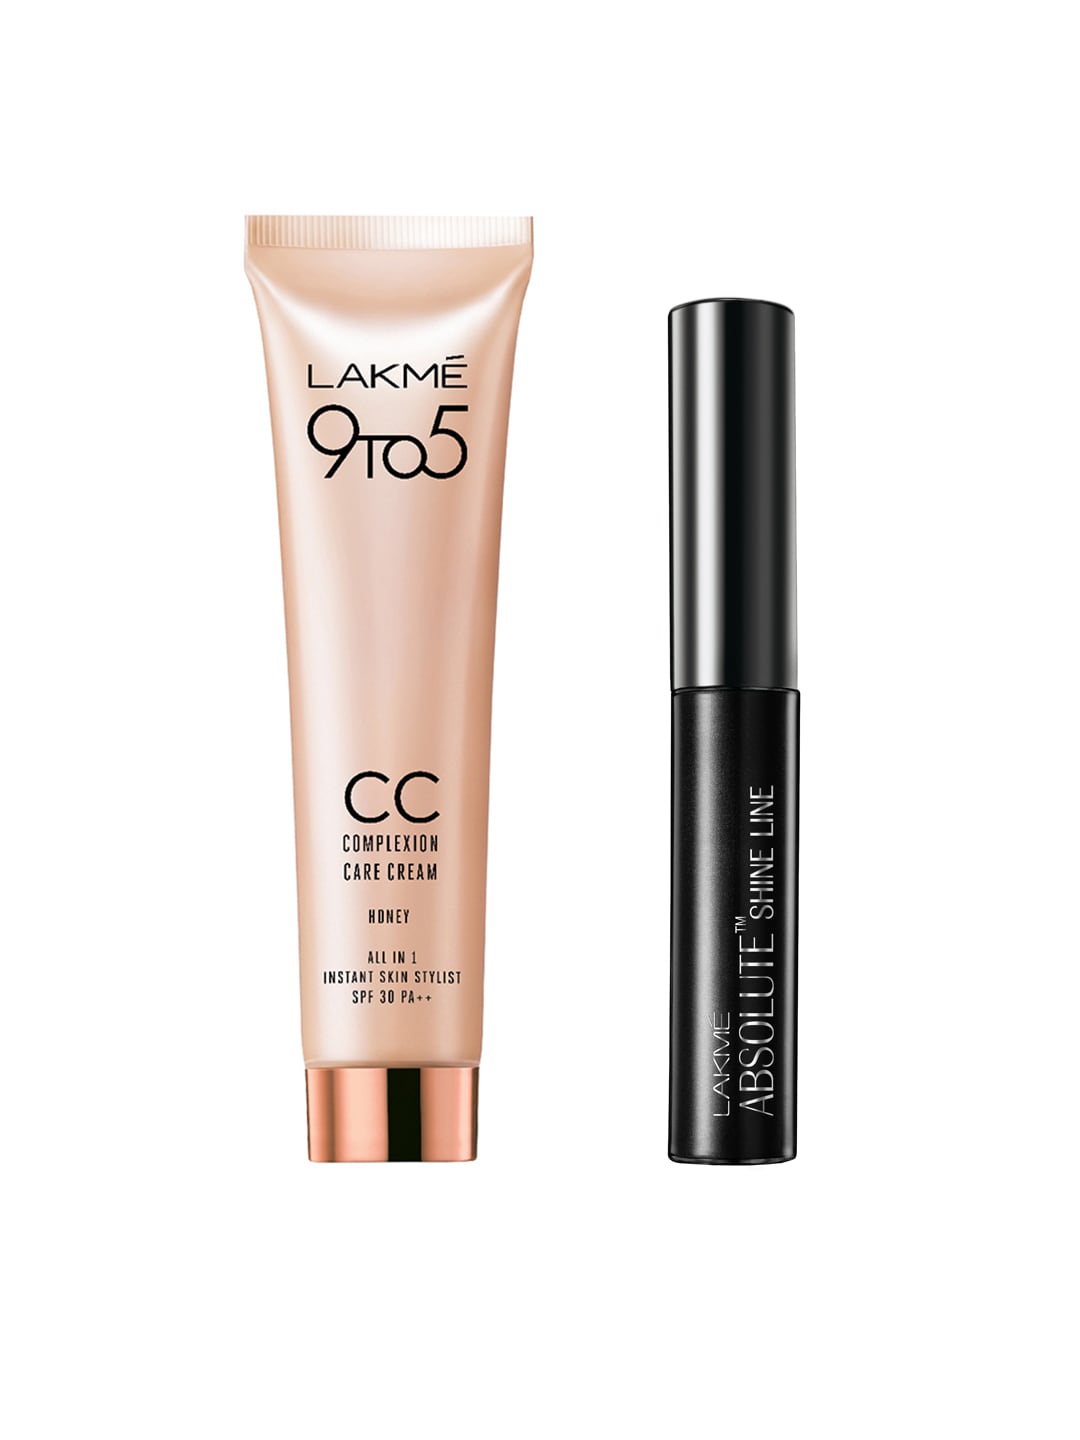 Lakme 9to5 Honey Complexion Care Cream 30g & Absolute Shine Line Black Eye Liner Price in India